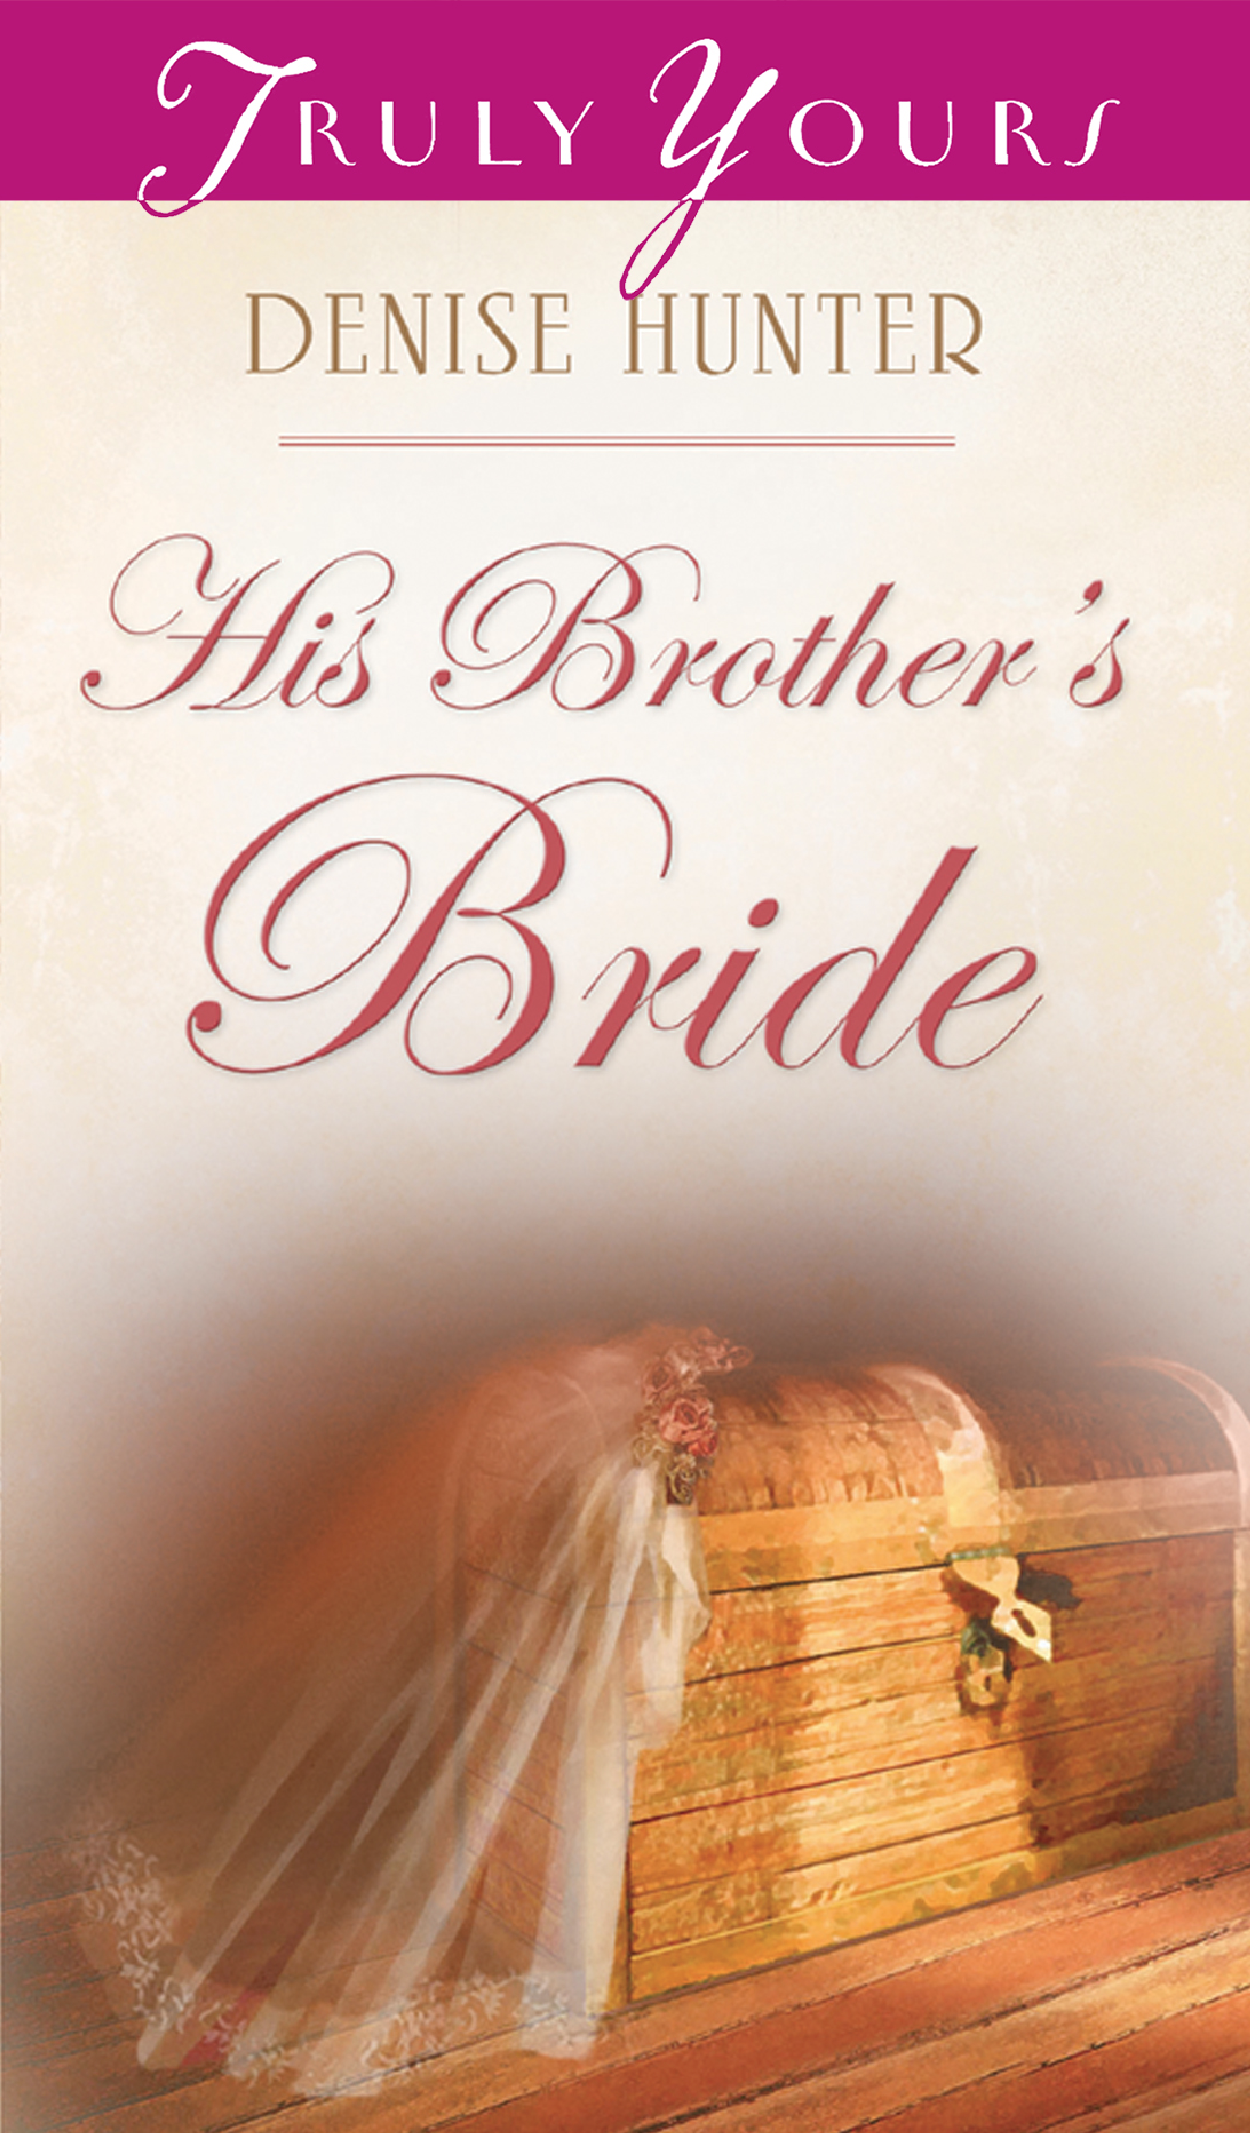 His Brother's Bride (2013) by Denise Hunter